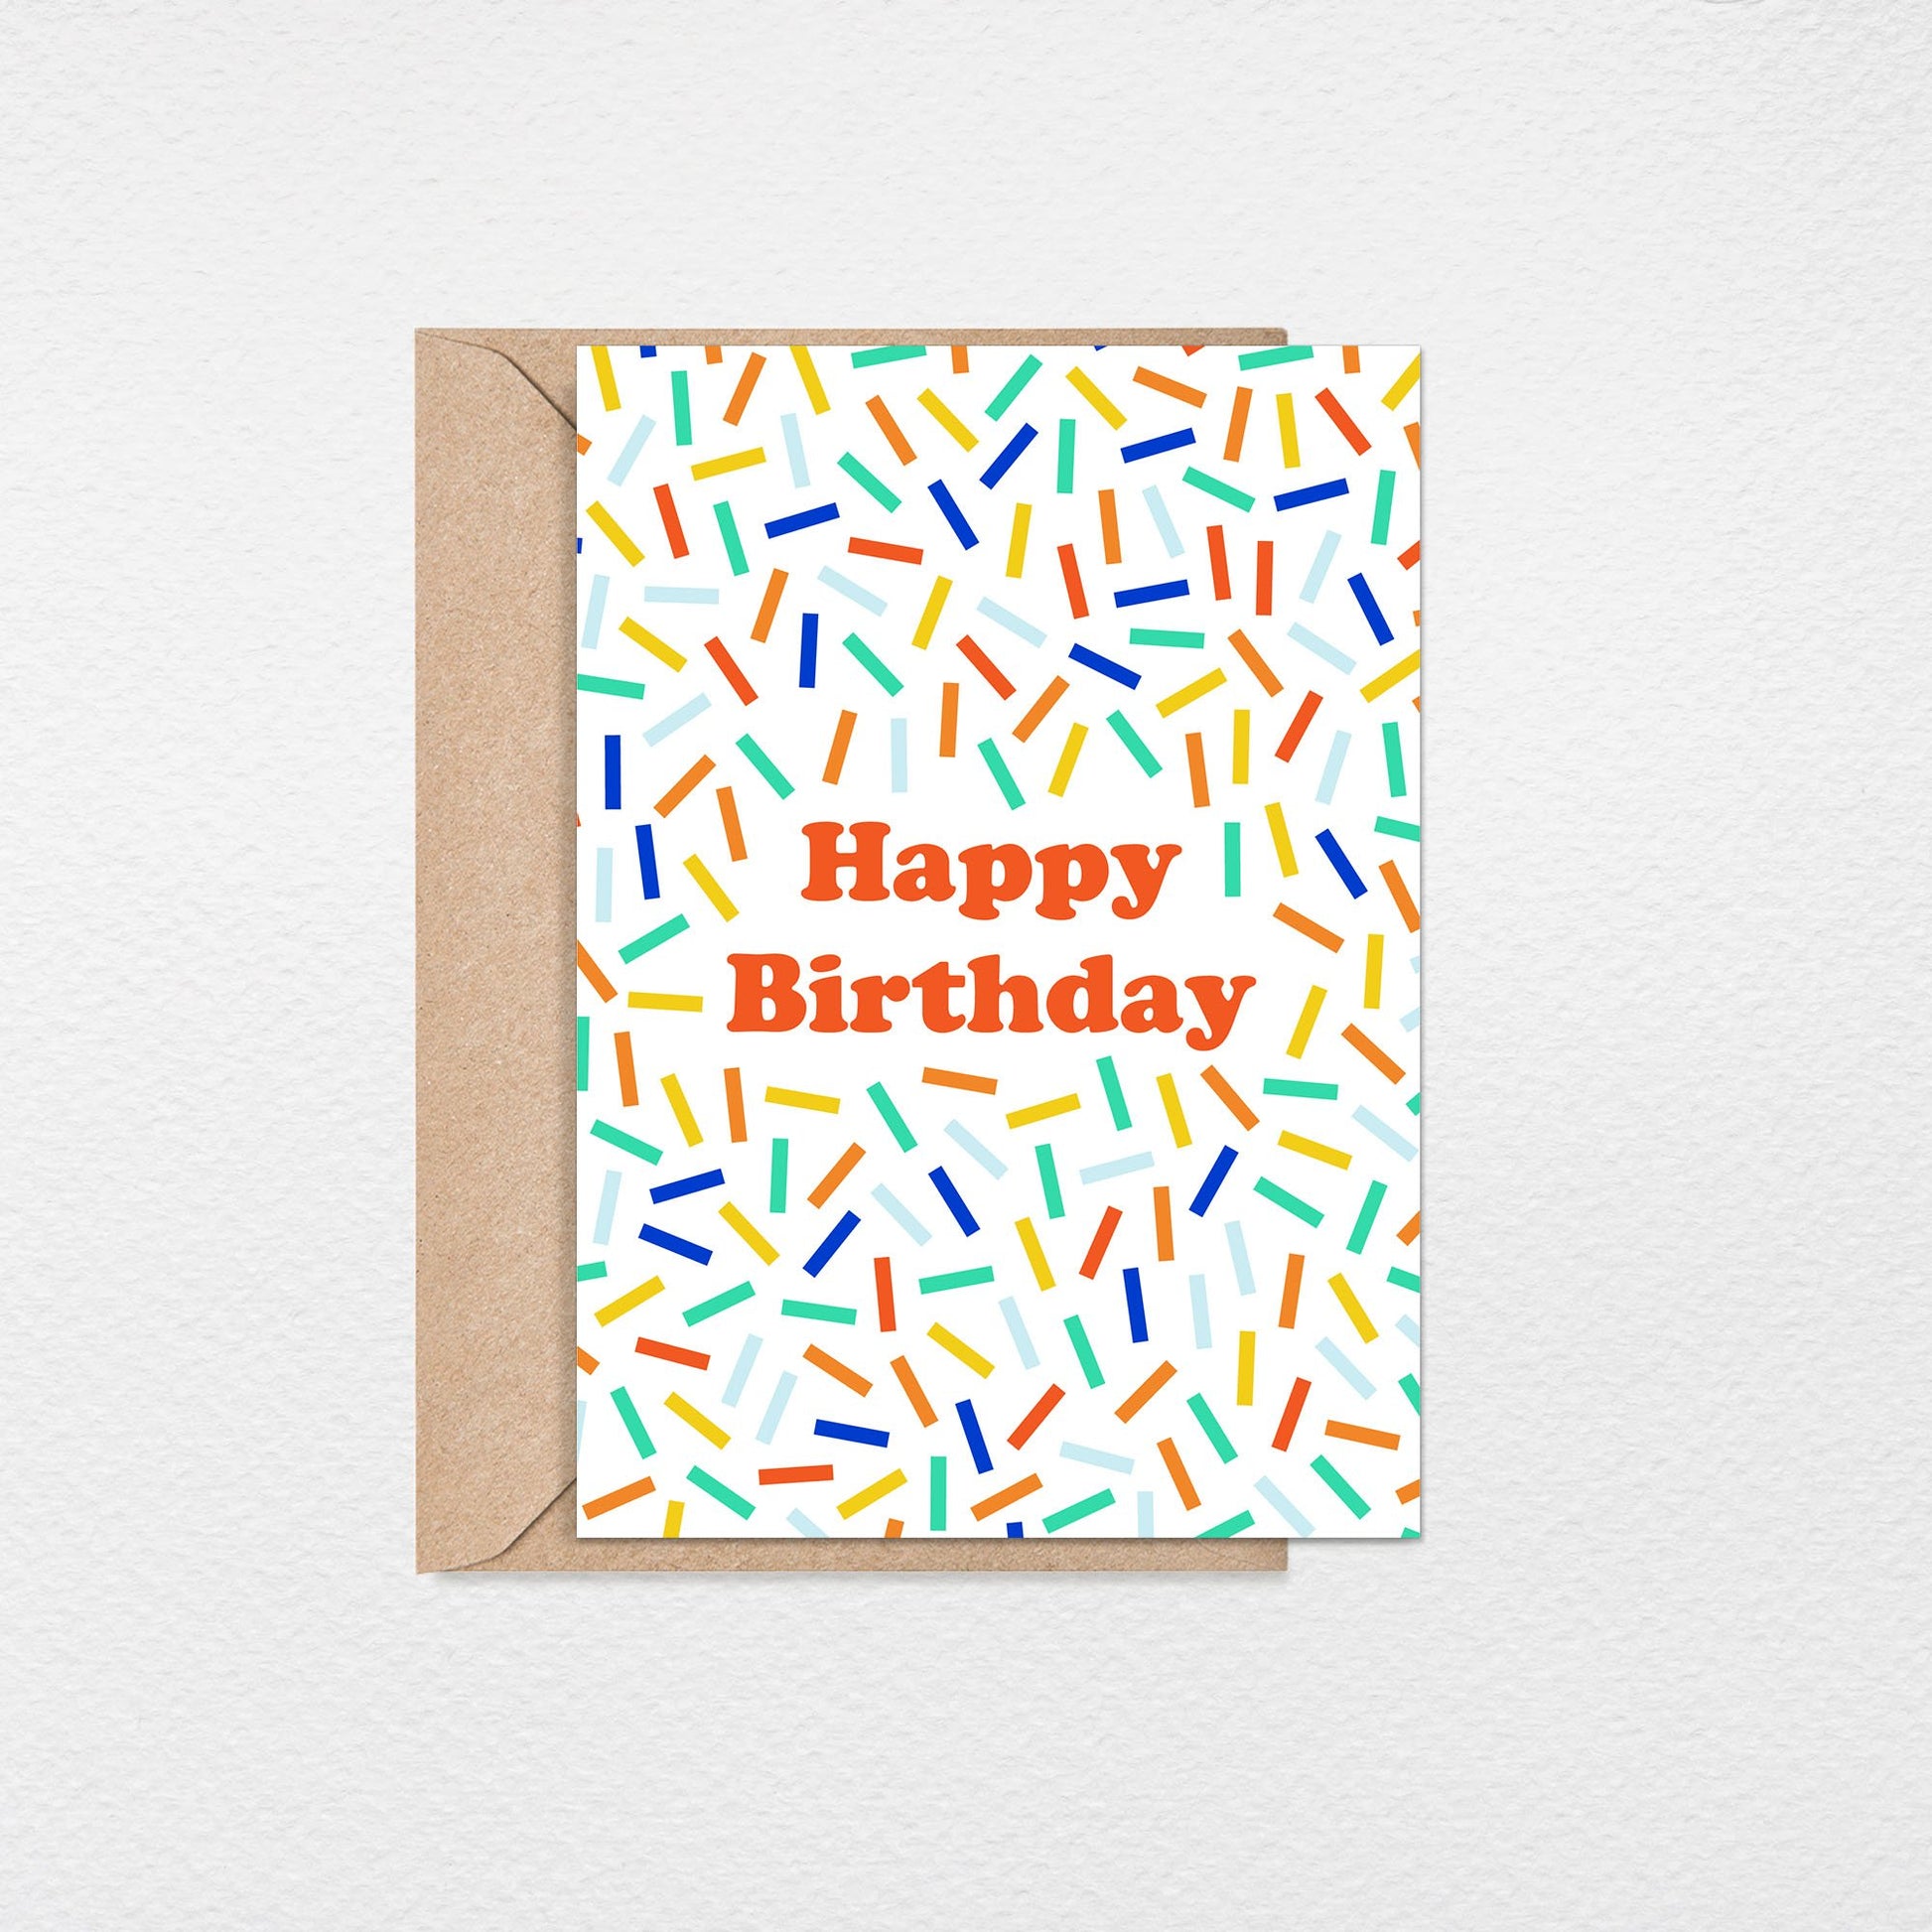 Birthday Confetti 5x7” greeting card from Goods Made By Digitrillnana, Ashley Fletcher. Colorful greeting card.